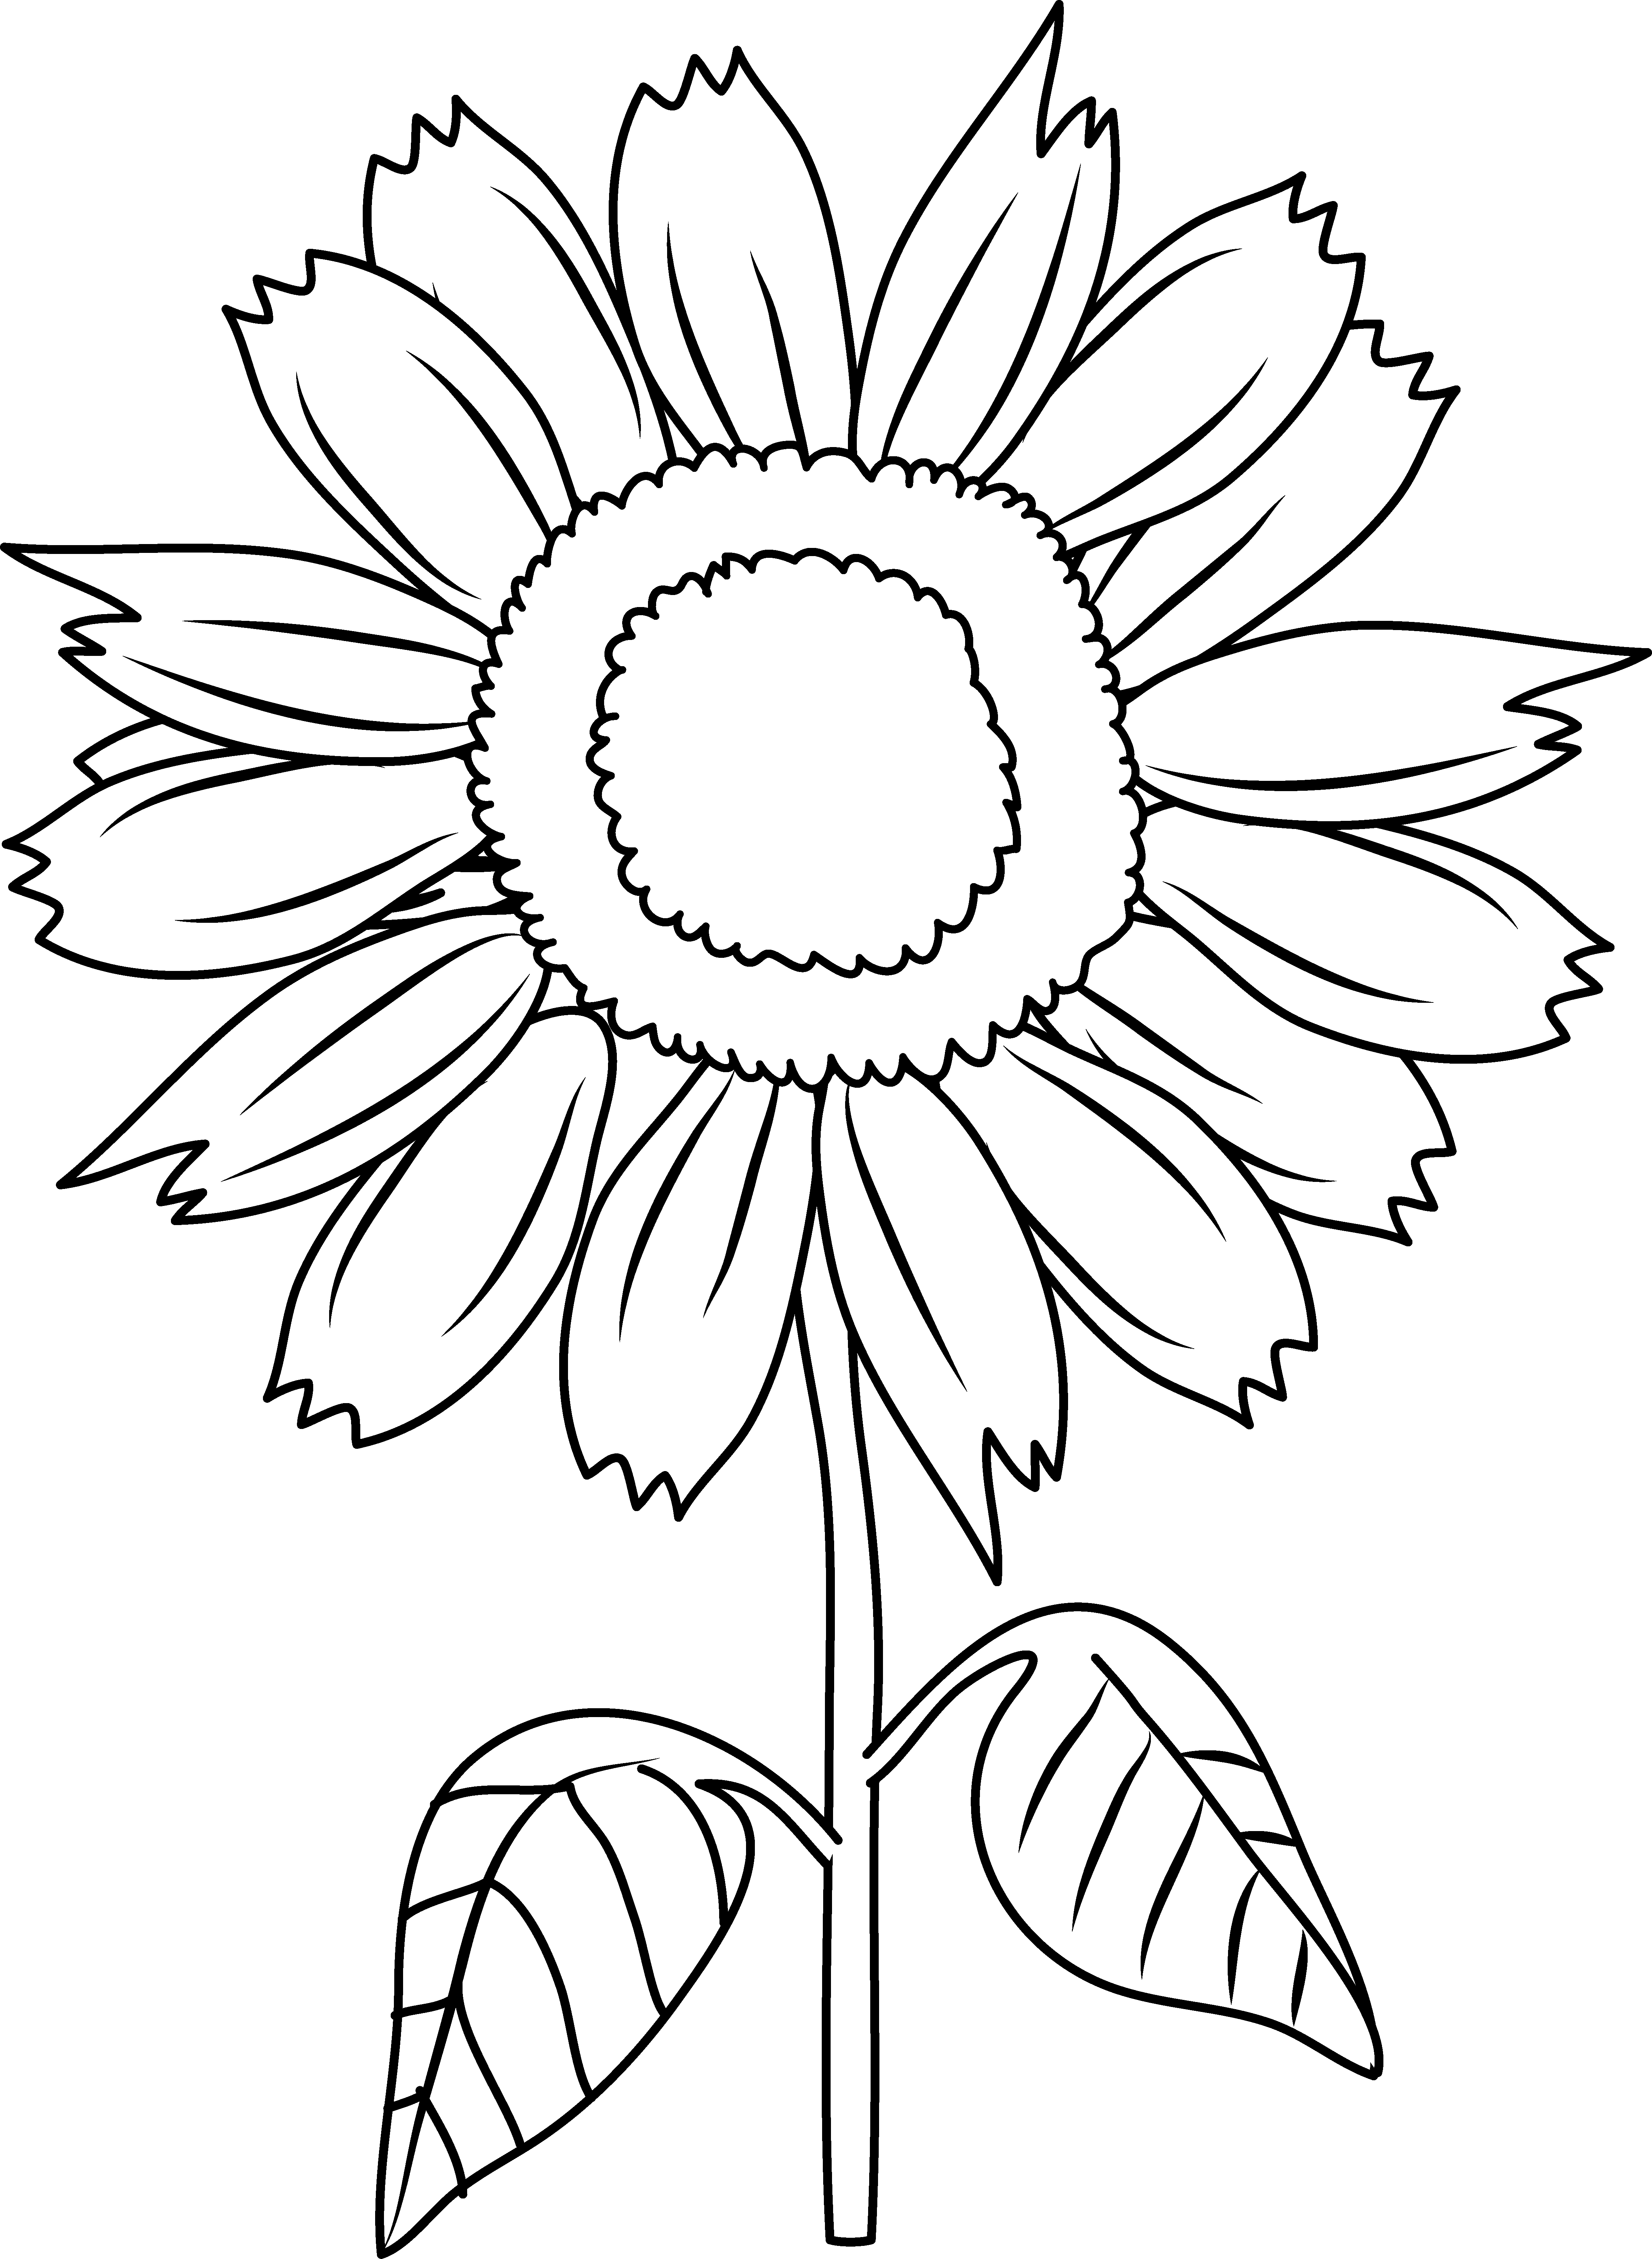 Pretty Sunflower Coloring Page - Free Clip Art